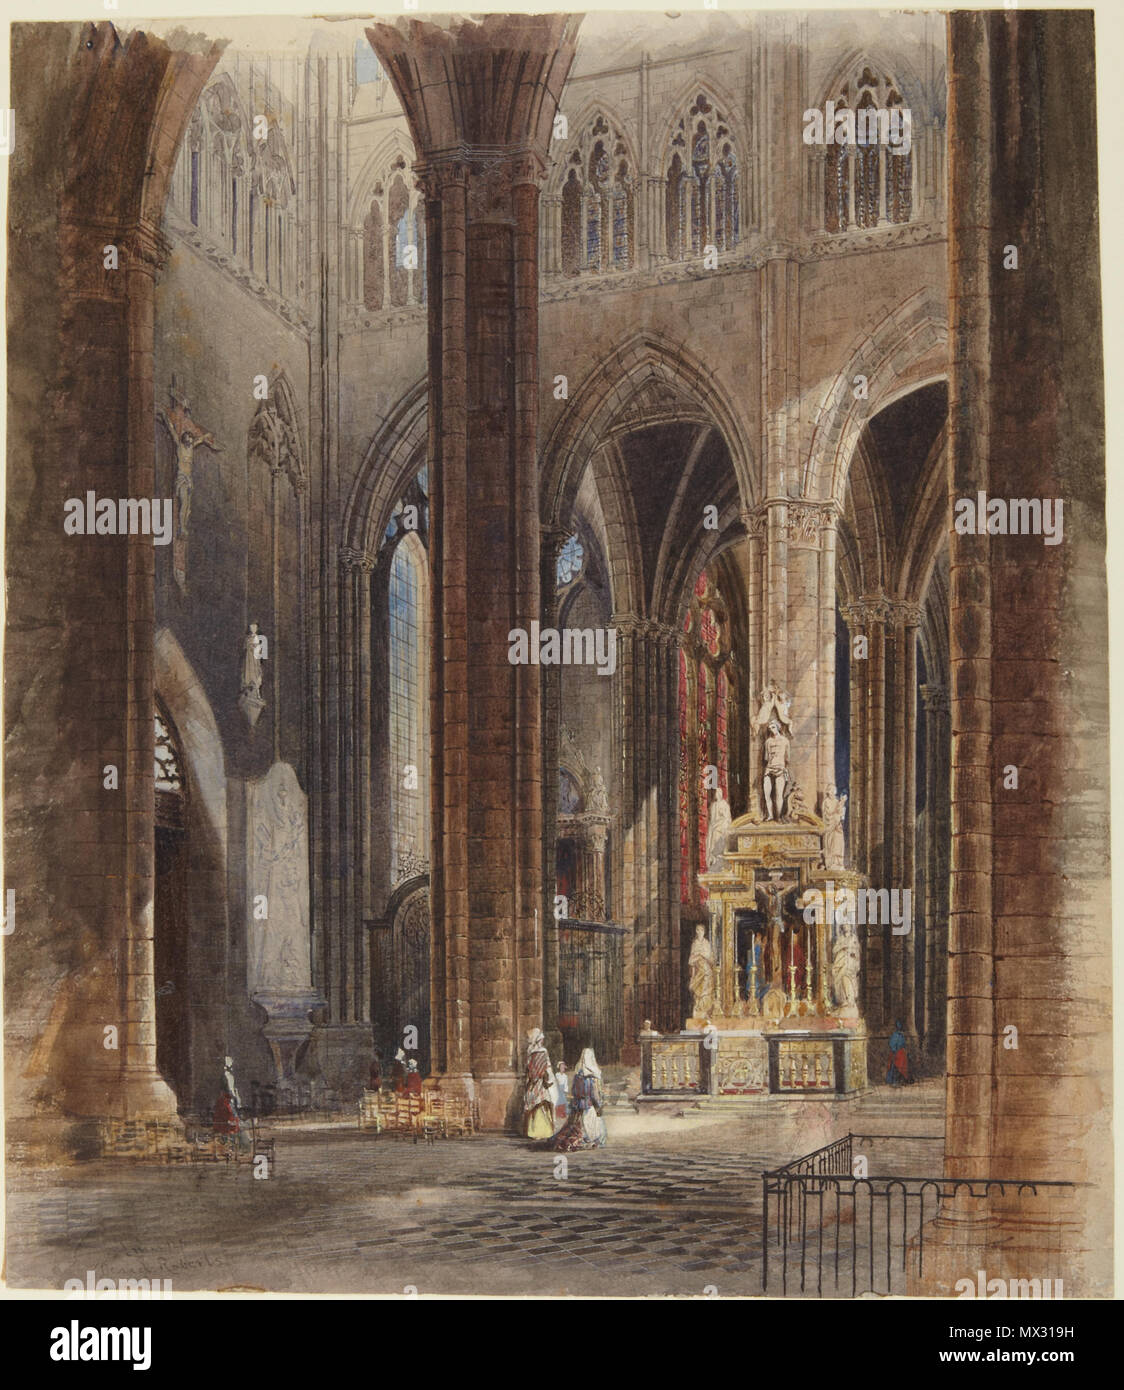 .  English: David Roberts, British, born in Scotland, 1796–1864 Interior of Amiens Cathedral, ca. 1827 Watercolor on cream wove paper 36.3 x 31.3 cm (14 5/16 x 12 5/16 in.) Gift of Robert A. Koch, Graduate School Class of 1954 x1969-380 Roberts was trained as a house painter specializing in decorative interiors at a time when wealthy patrons often required such craftsmen to create elaborate trompe l’oeil architectural effects based on historical models. Although his exceptional talents quickly led to a successful career in London as a designer and painter of theatrical sets and panoramas, he u Stock Photo